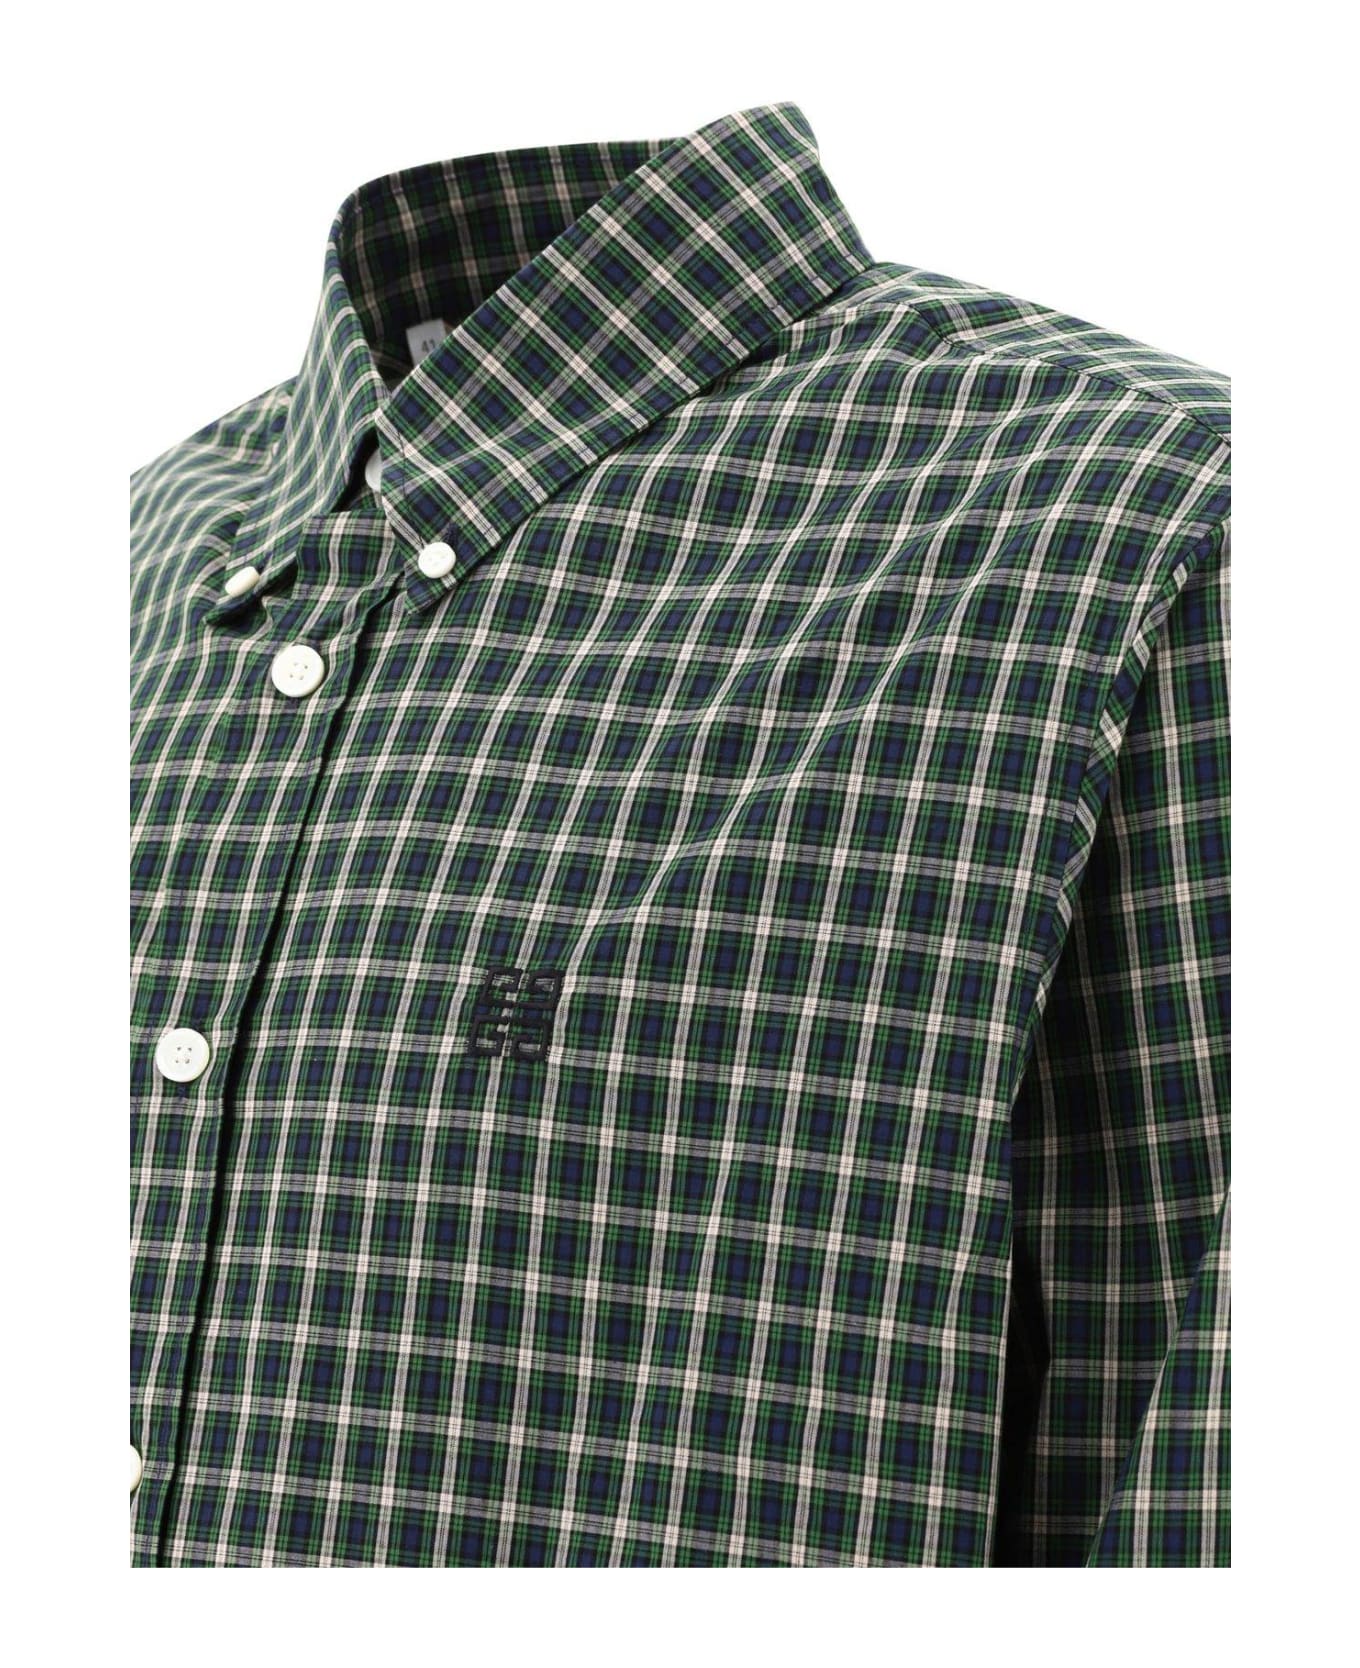 Givenchy Logo Motif Embroidered Check Buttoned Shirt - Multicolour